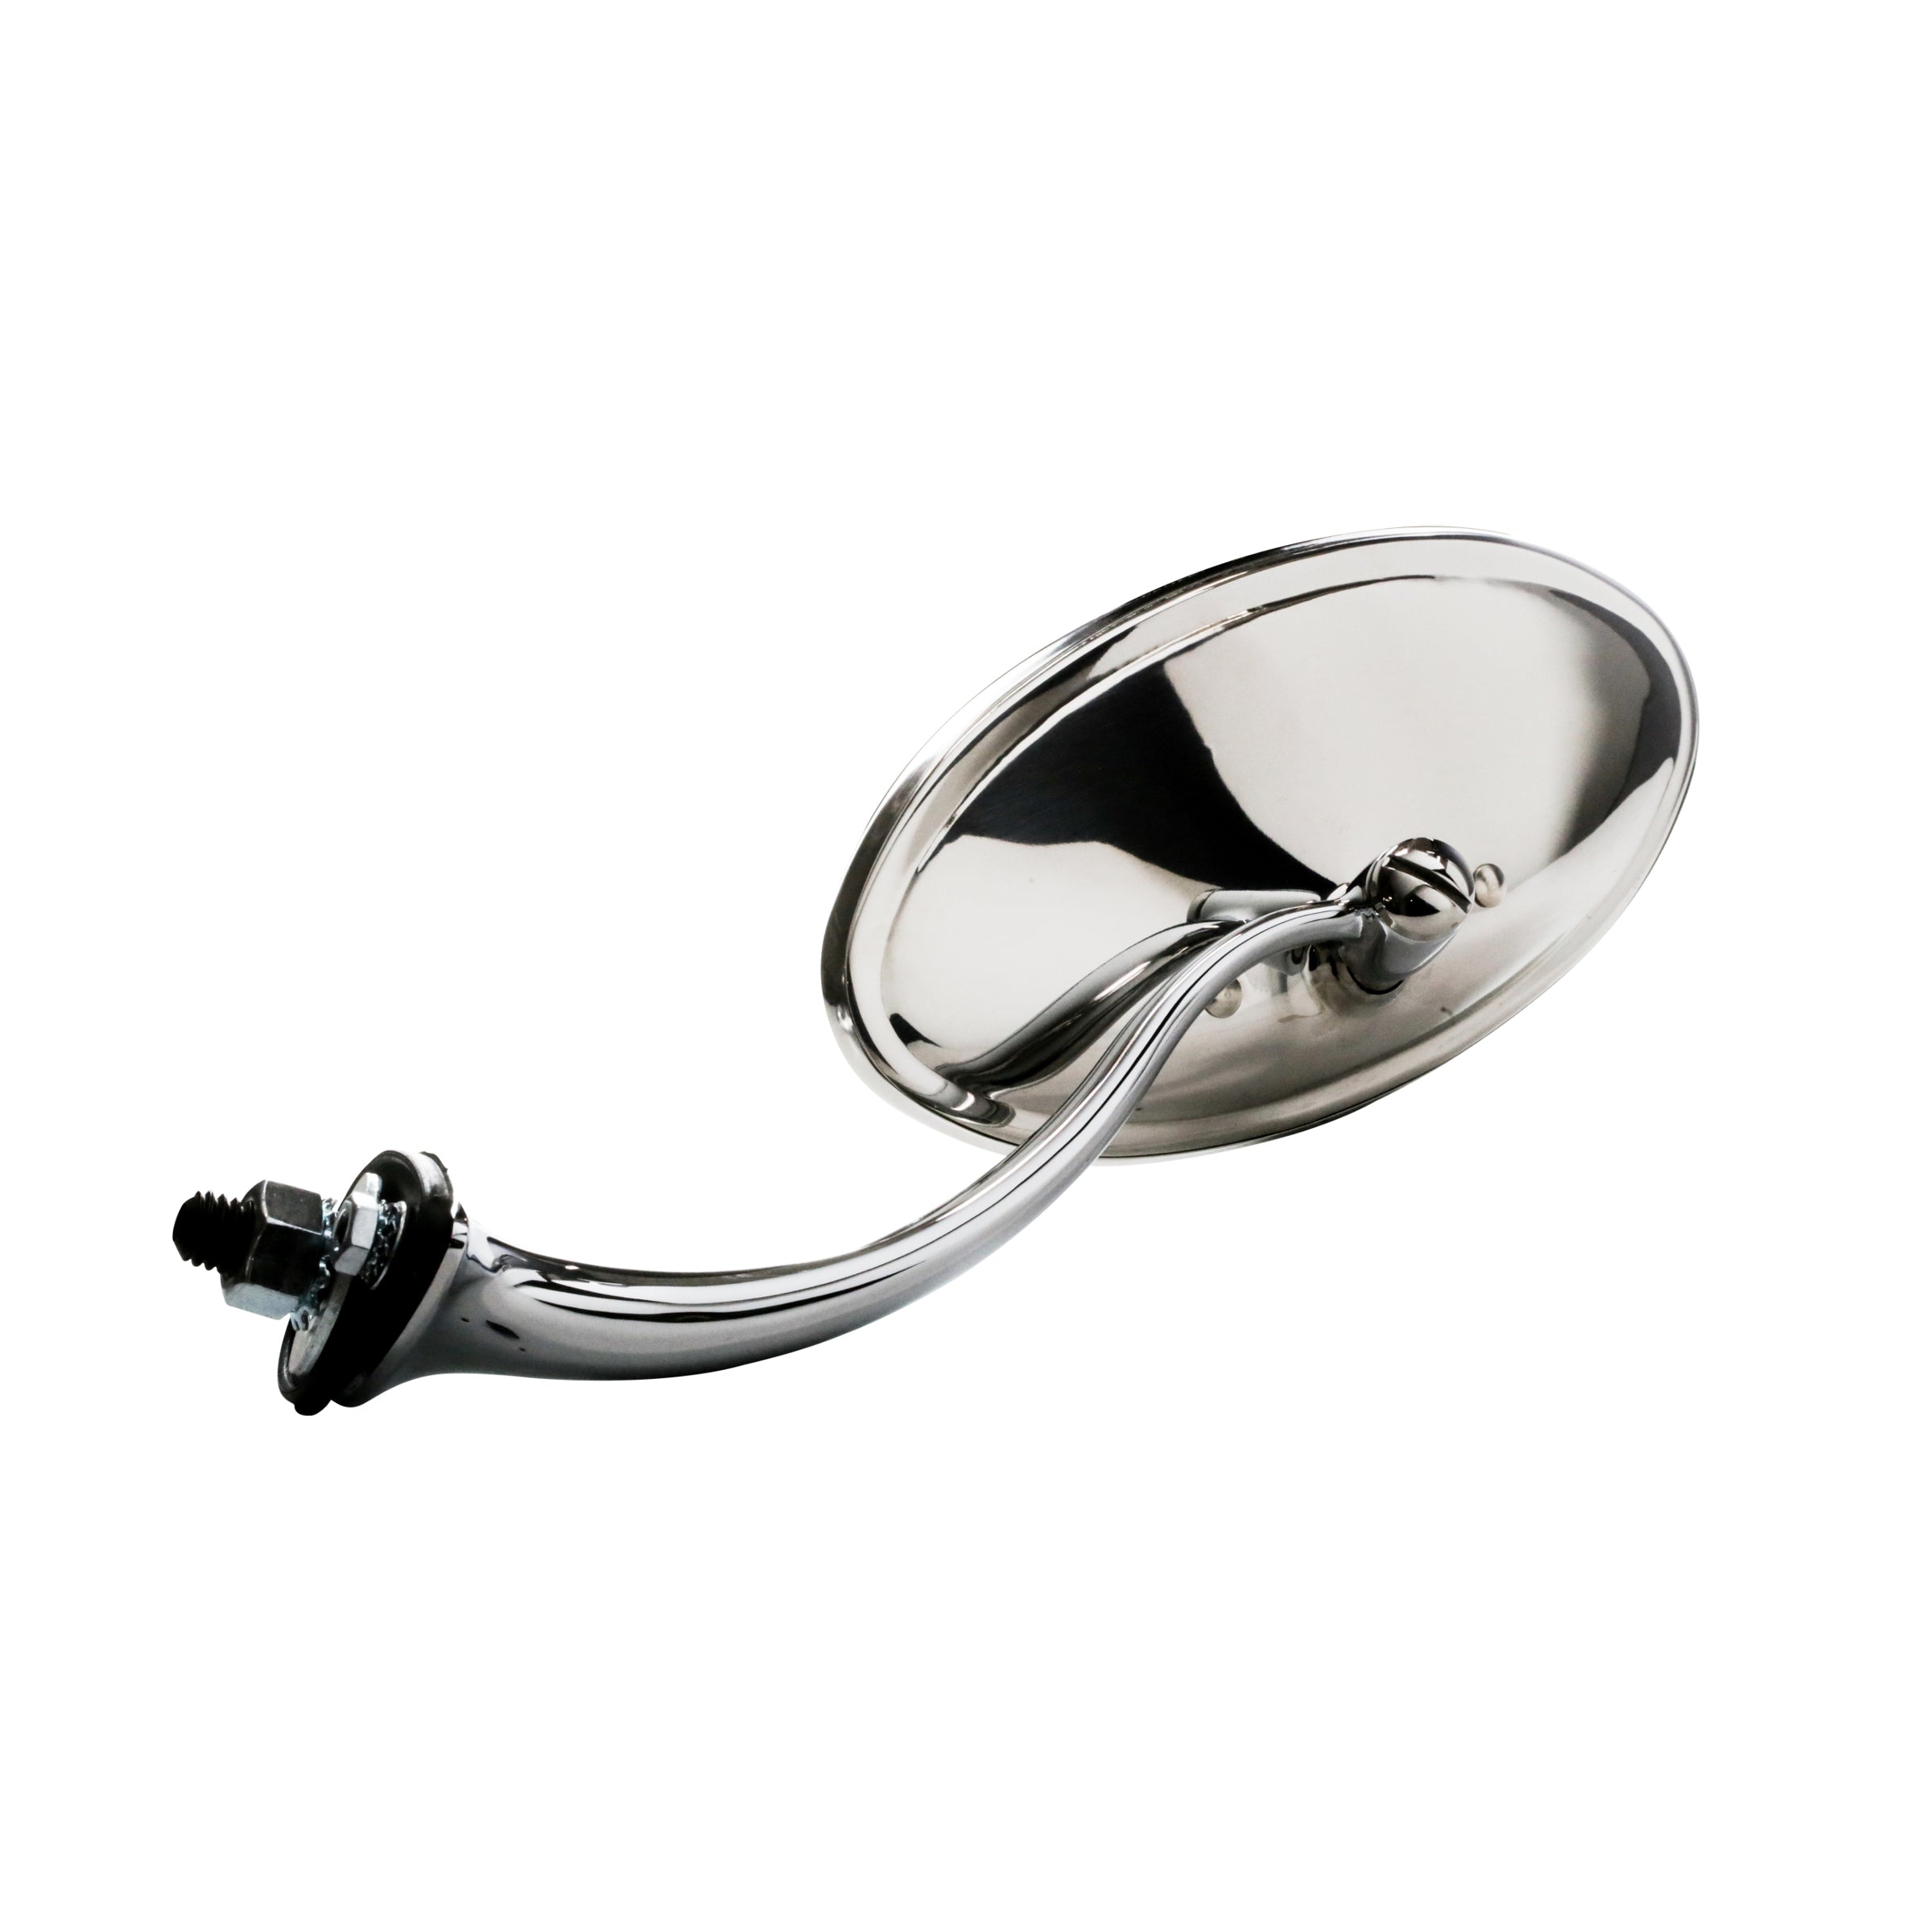 Swan Style Mirror (Oval, Left) • Ford Universal